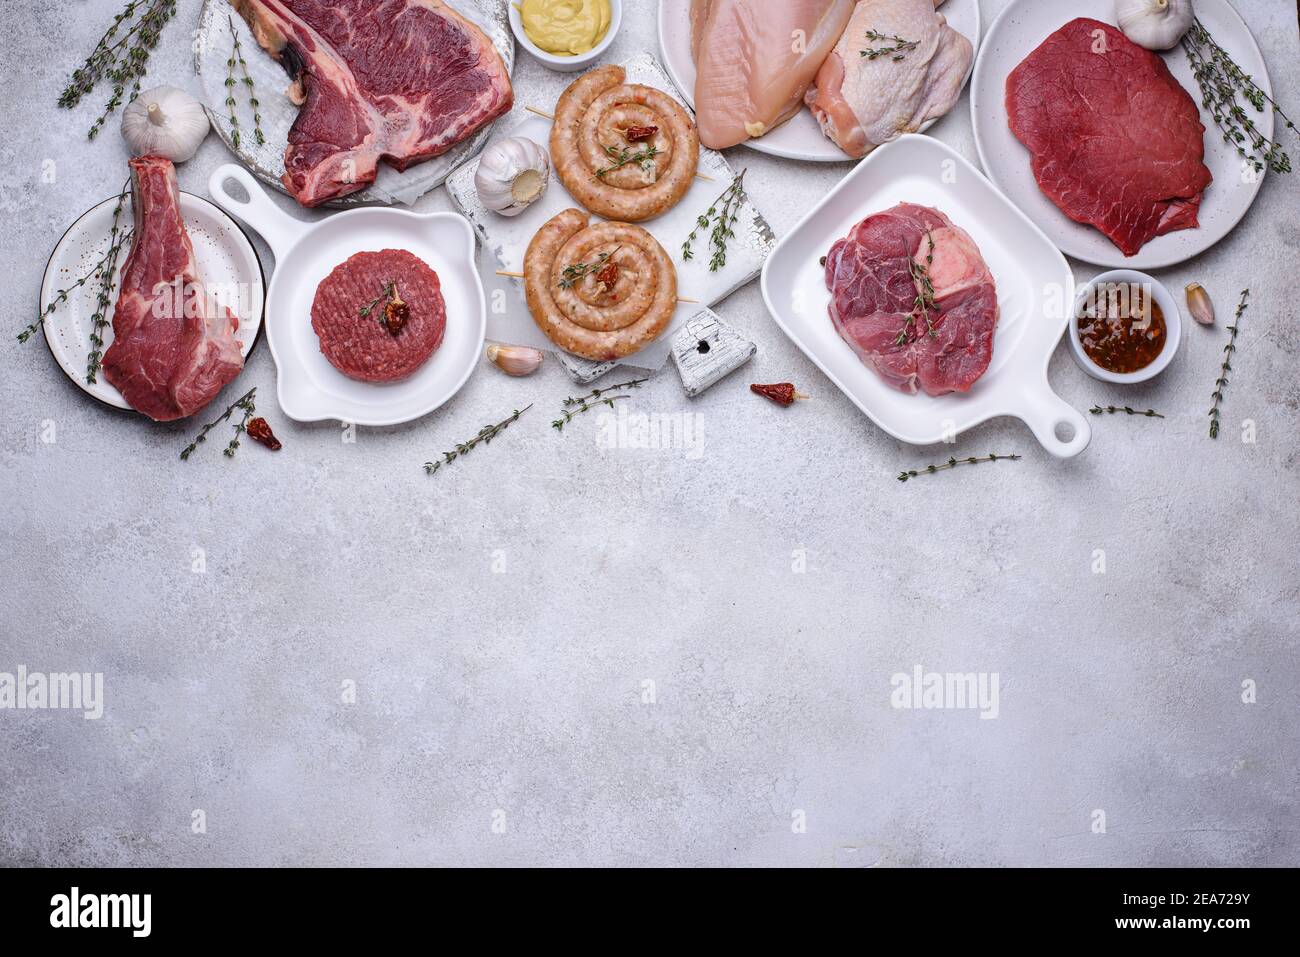 Assortment of various types of meat Stock Photo